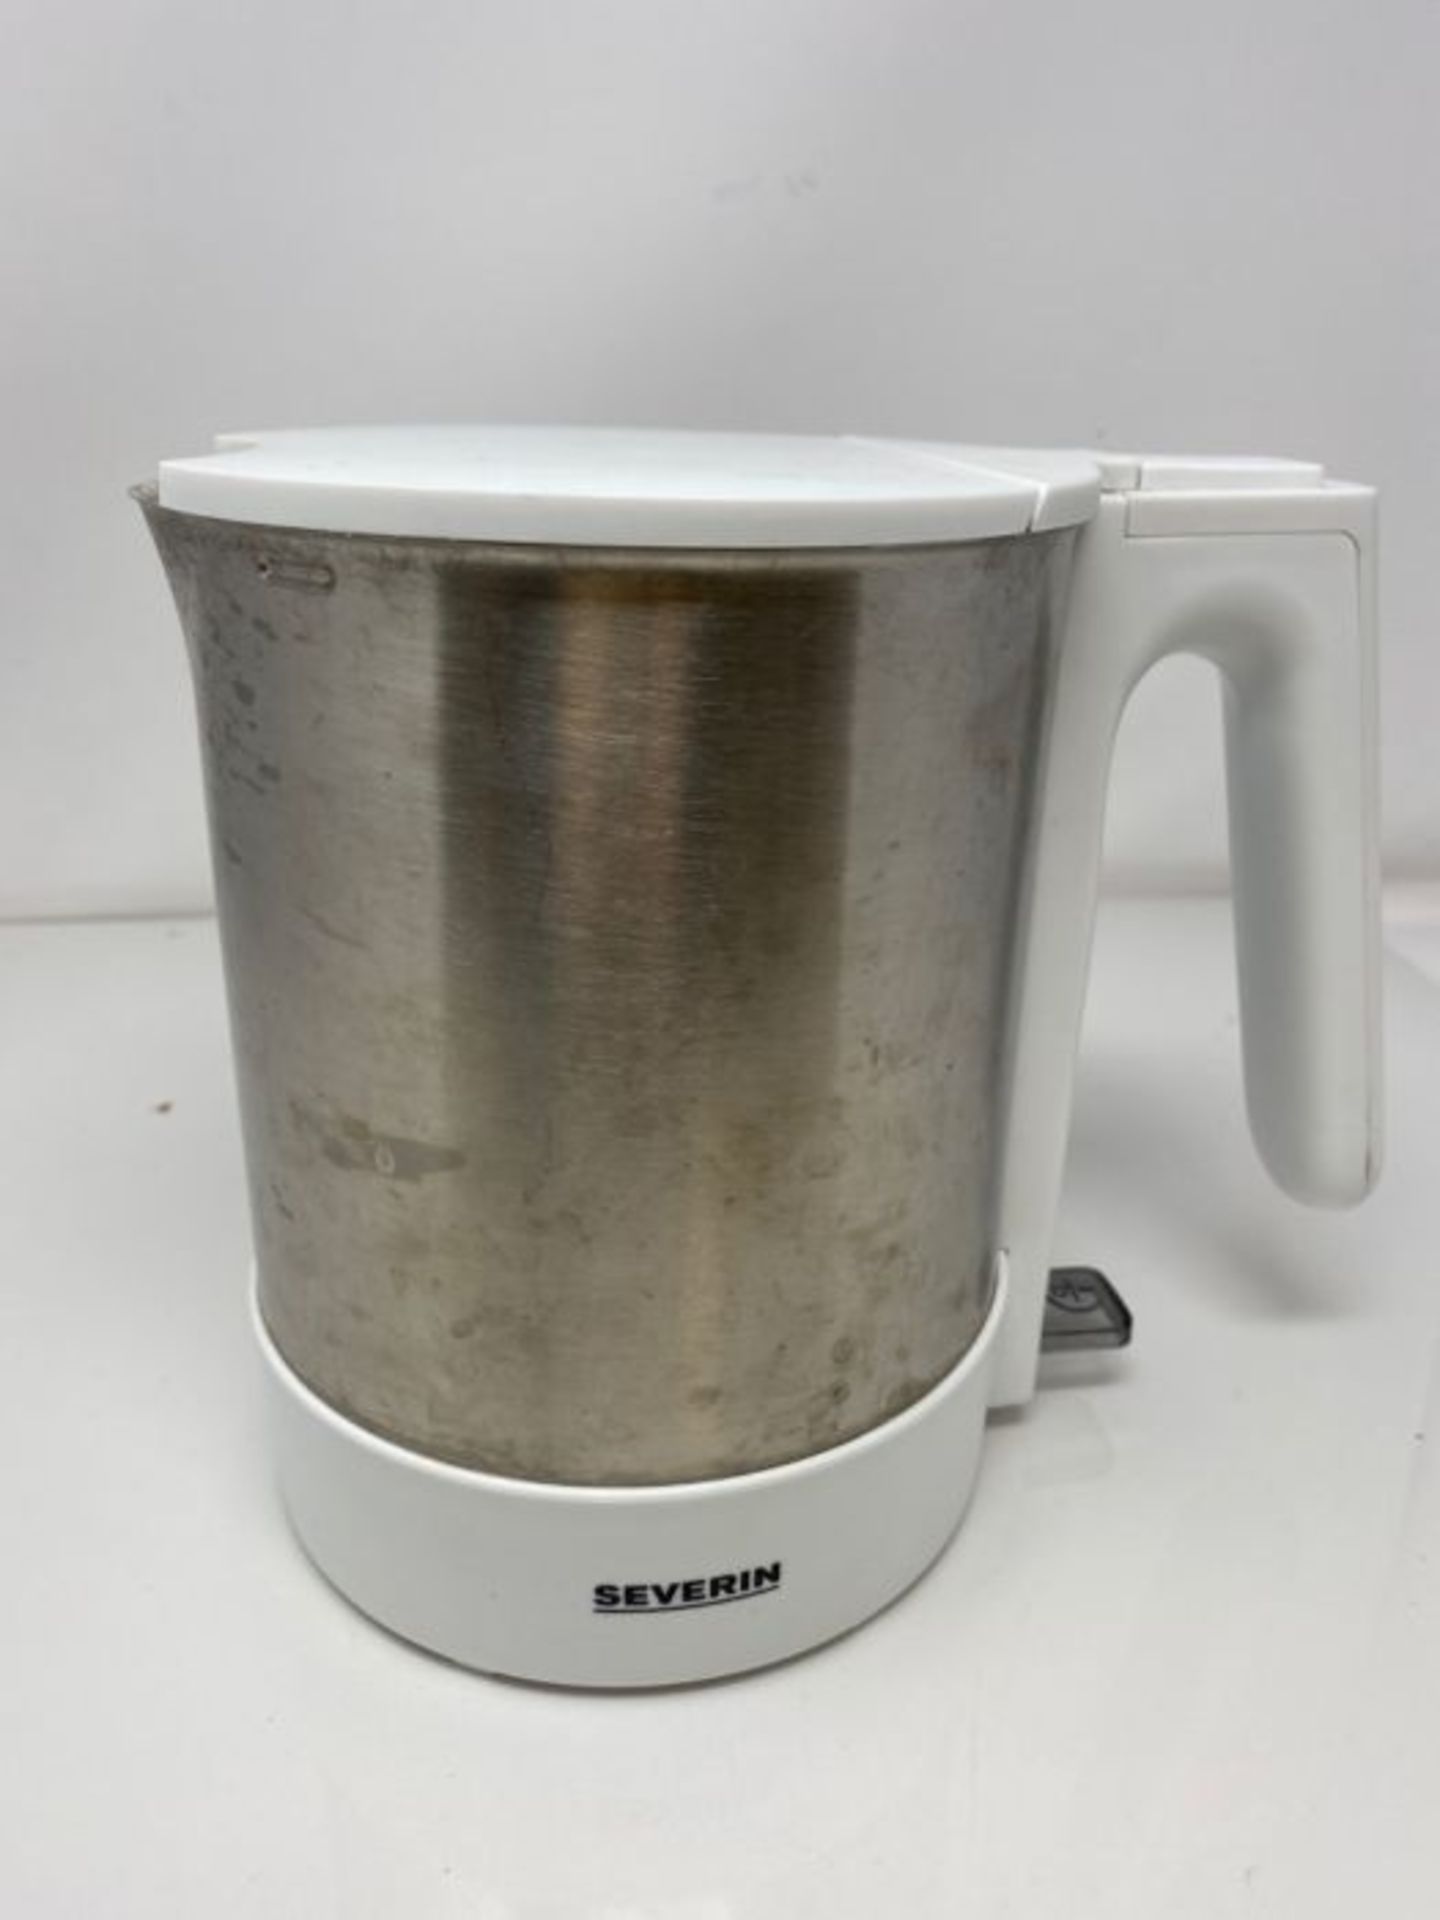 Severin WK 3419 electric kettle 1.7 L Stainless steel,White 2200 W WK 3419, 1.7 L, 220 - Image 2 of 3